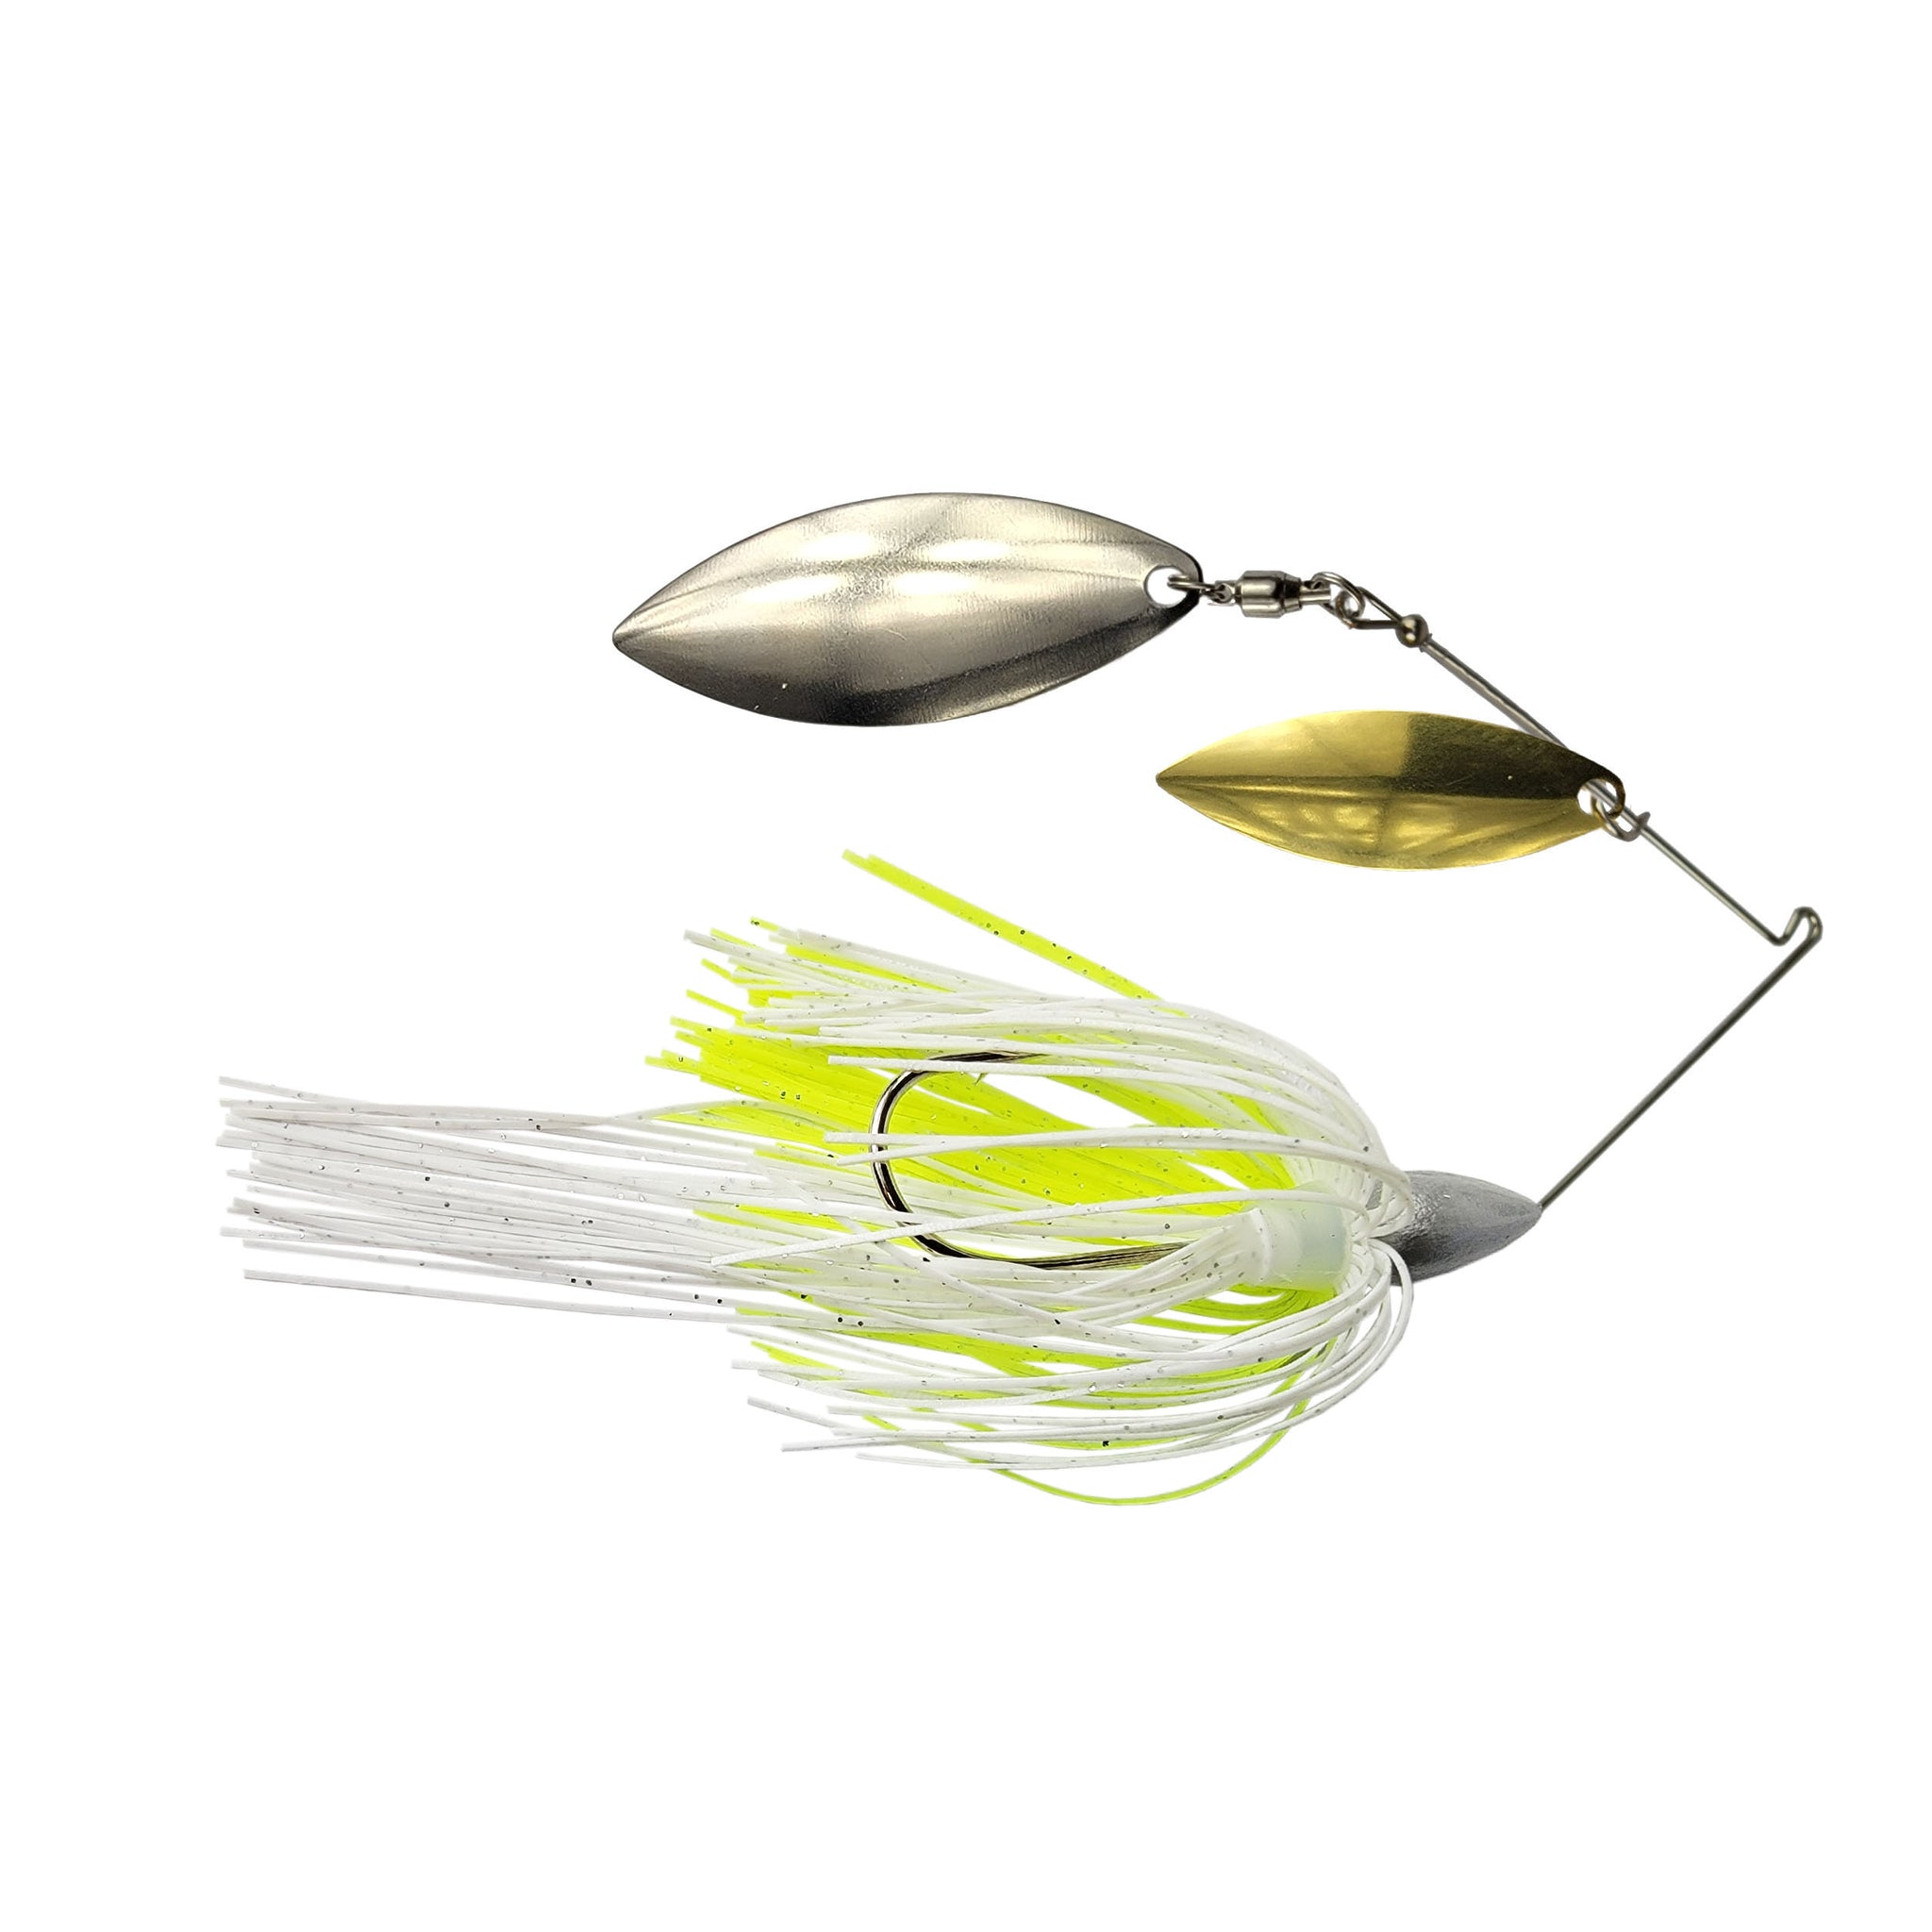 Tackle HD CS-II-DW Spinnerbait 3/8 oz - Chartreuse White